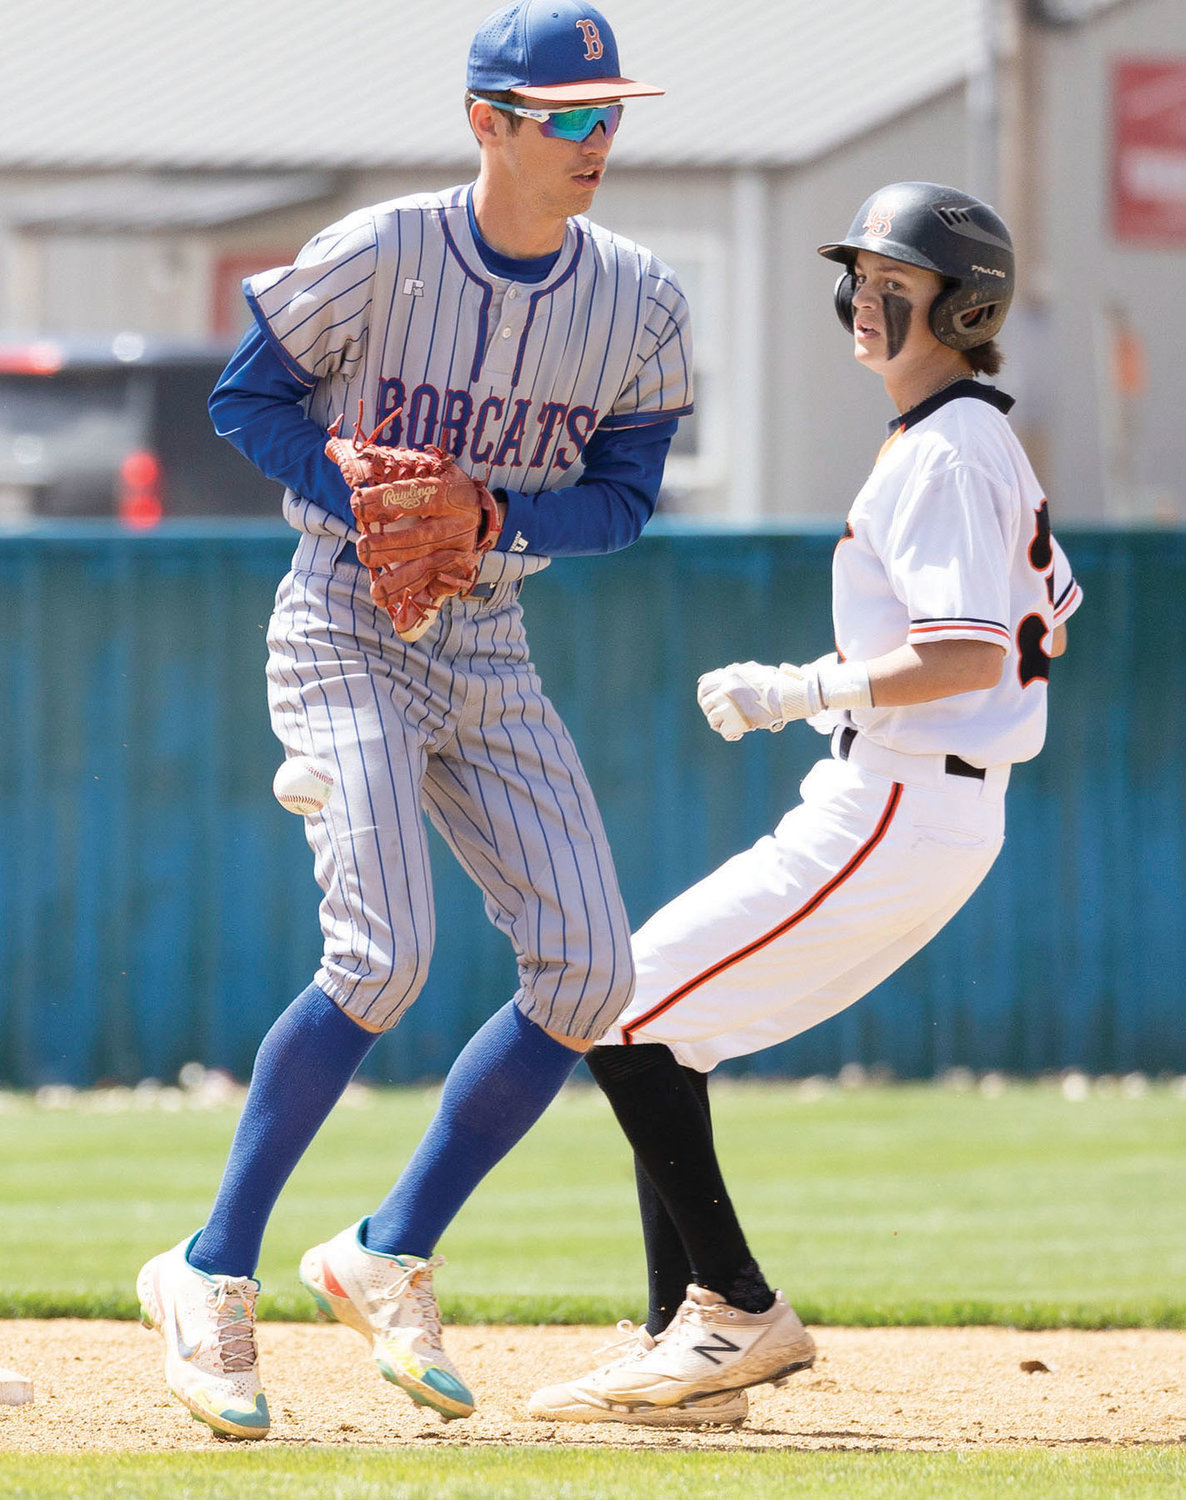 Lexington sophomore Dax Beason locates the ball while running the bases during the Bulldogs’ 8-4 win over Binger at the Dibble tournament. Beason was 2-2 with an RBI in the game.